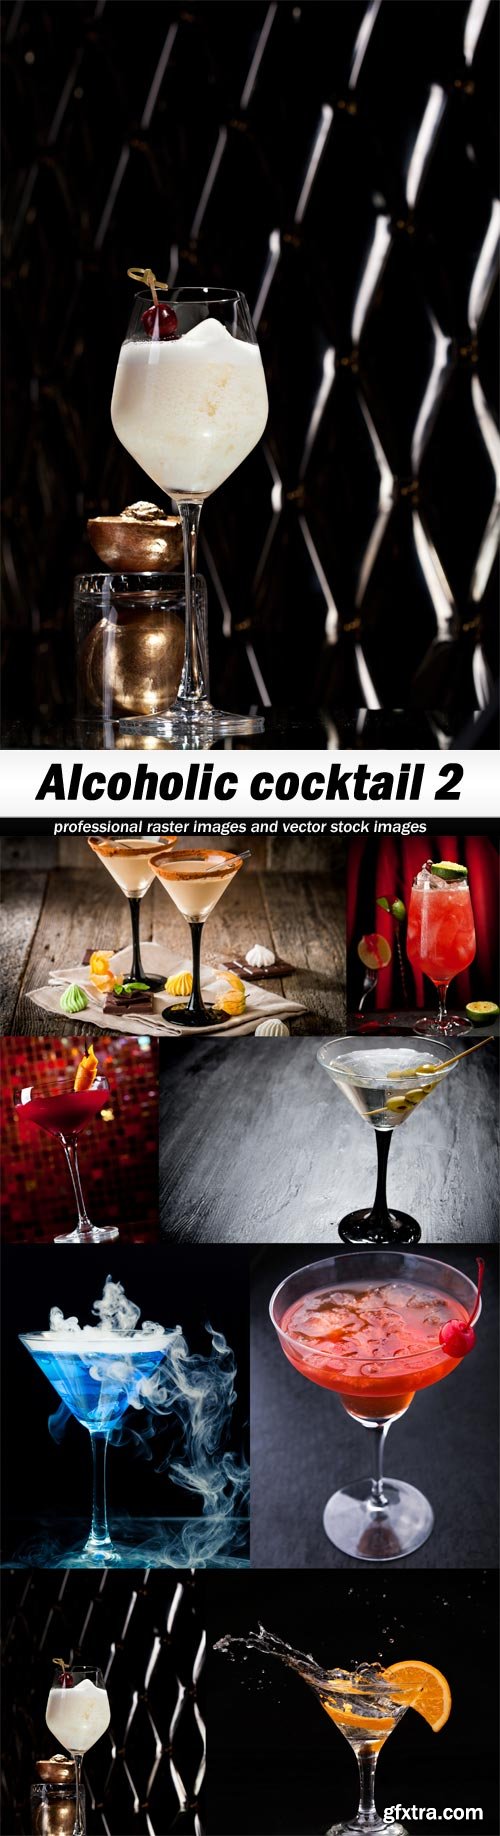 Alcoholic cocktail 2-8xJPEGs